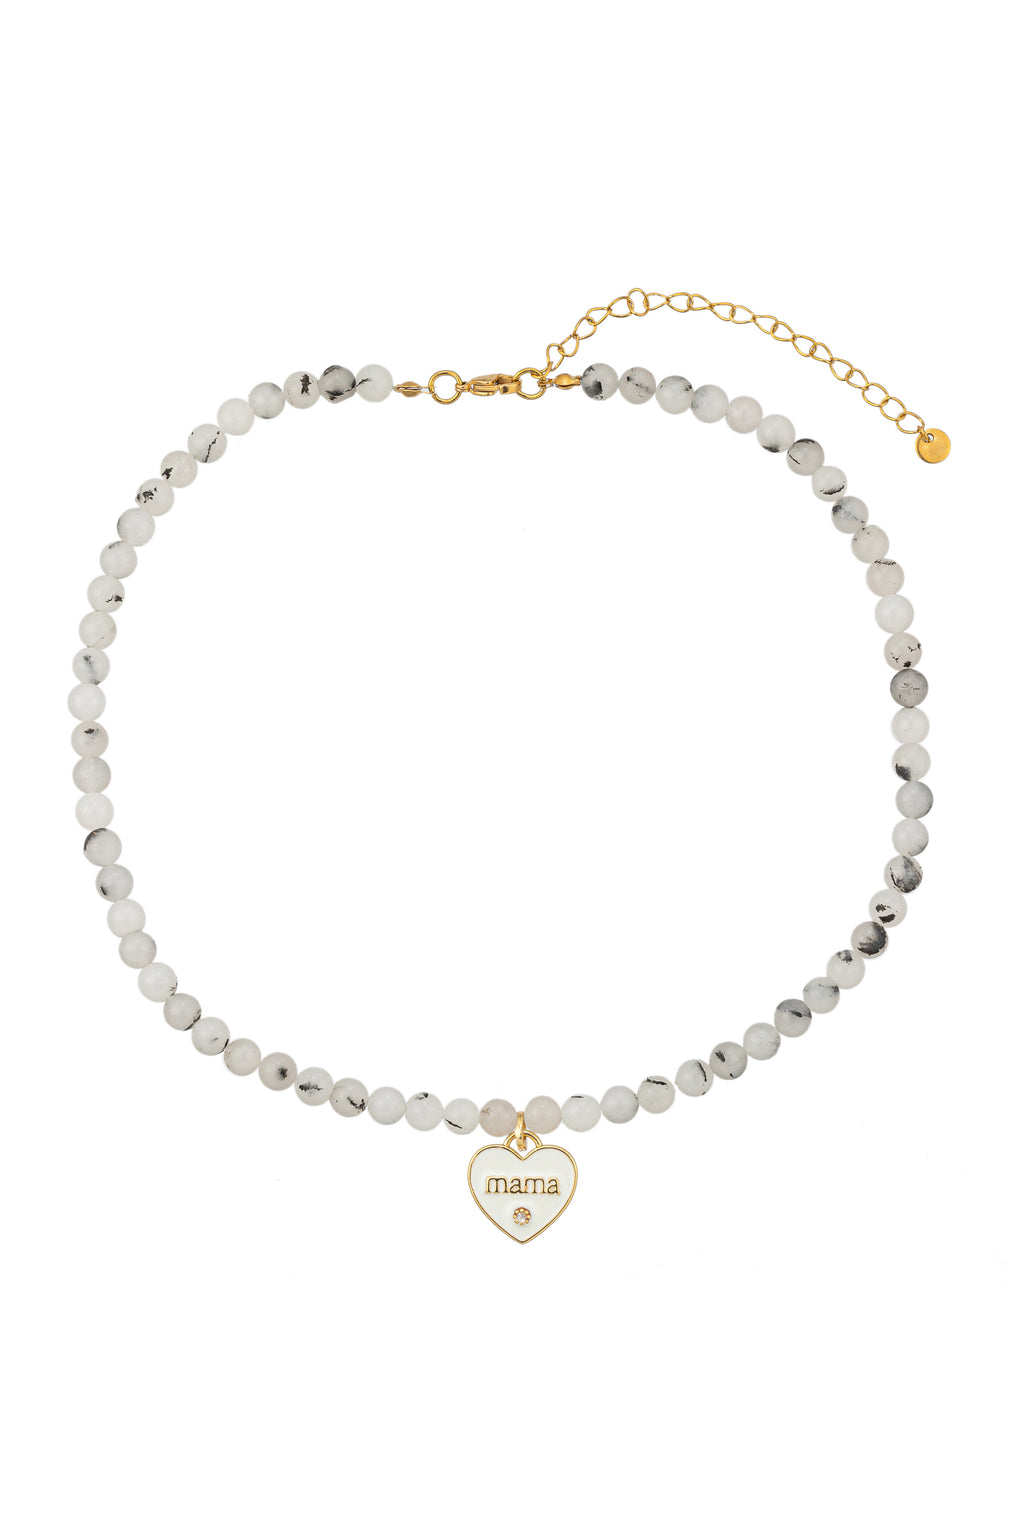 White agate stone beaded necklace with a brass heart pendant that is engraved with the word "MAMA".